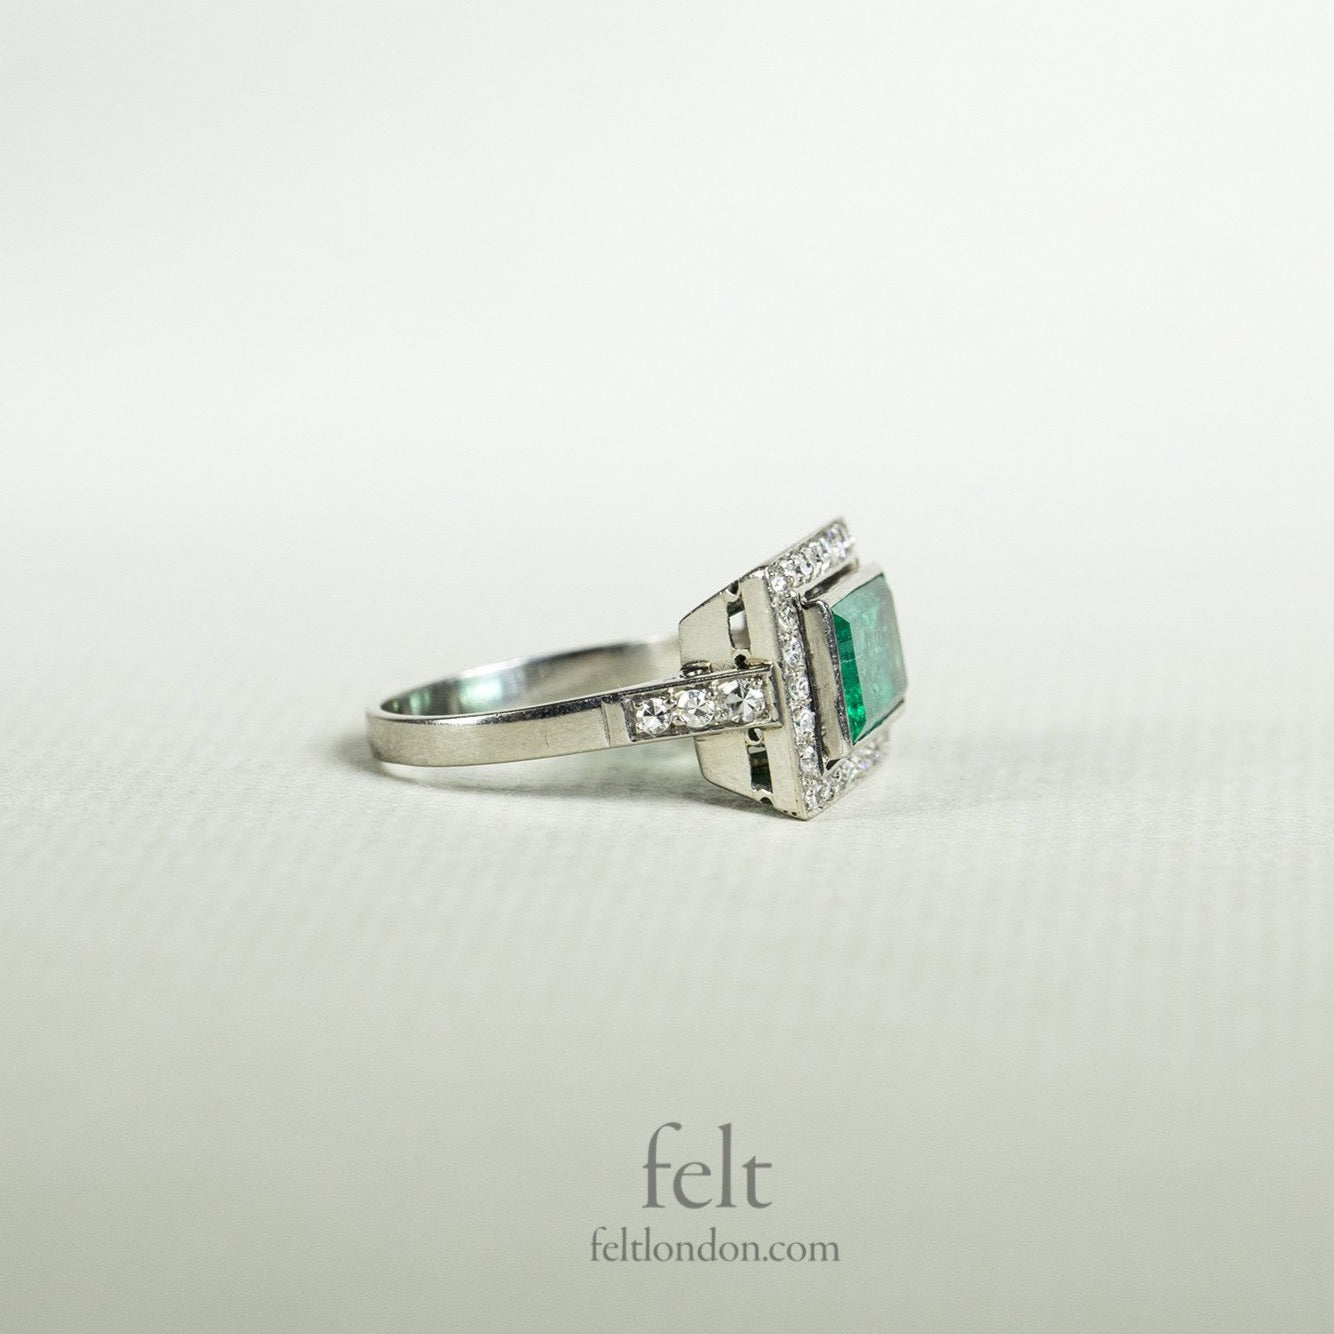 incredible colour and shine of the diamonds and the fantastic emerald